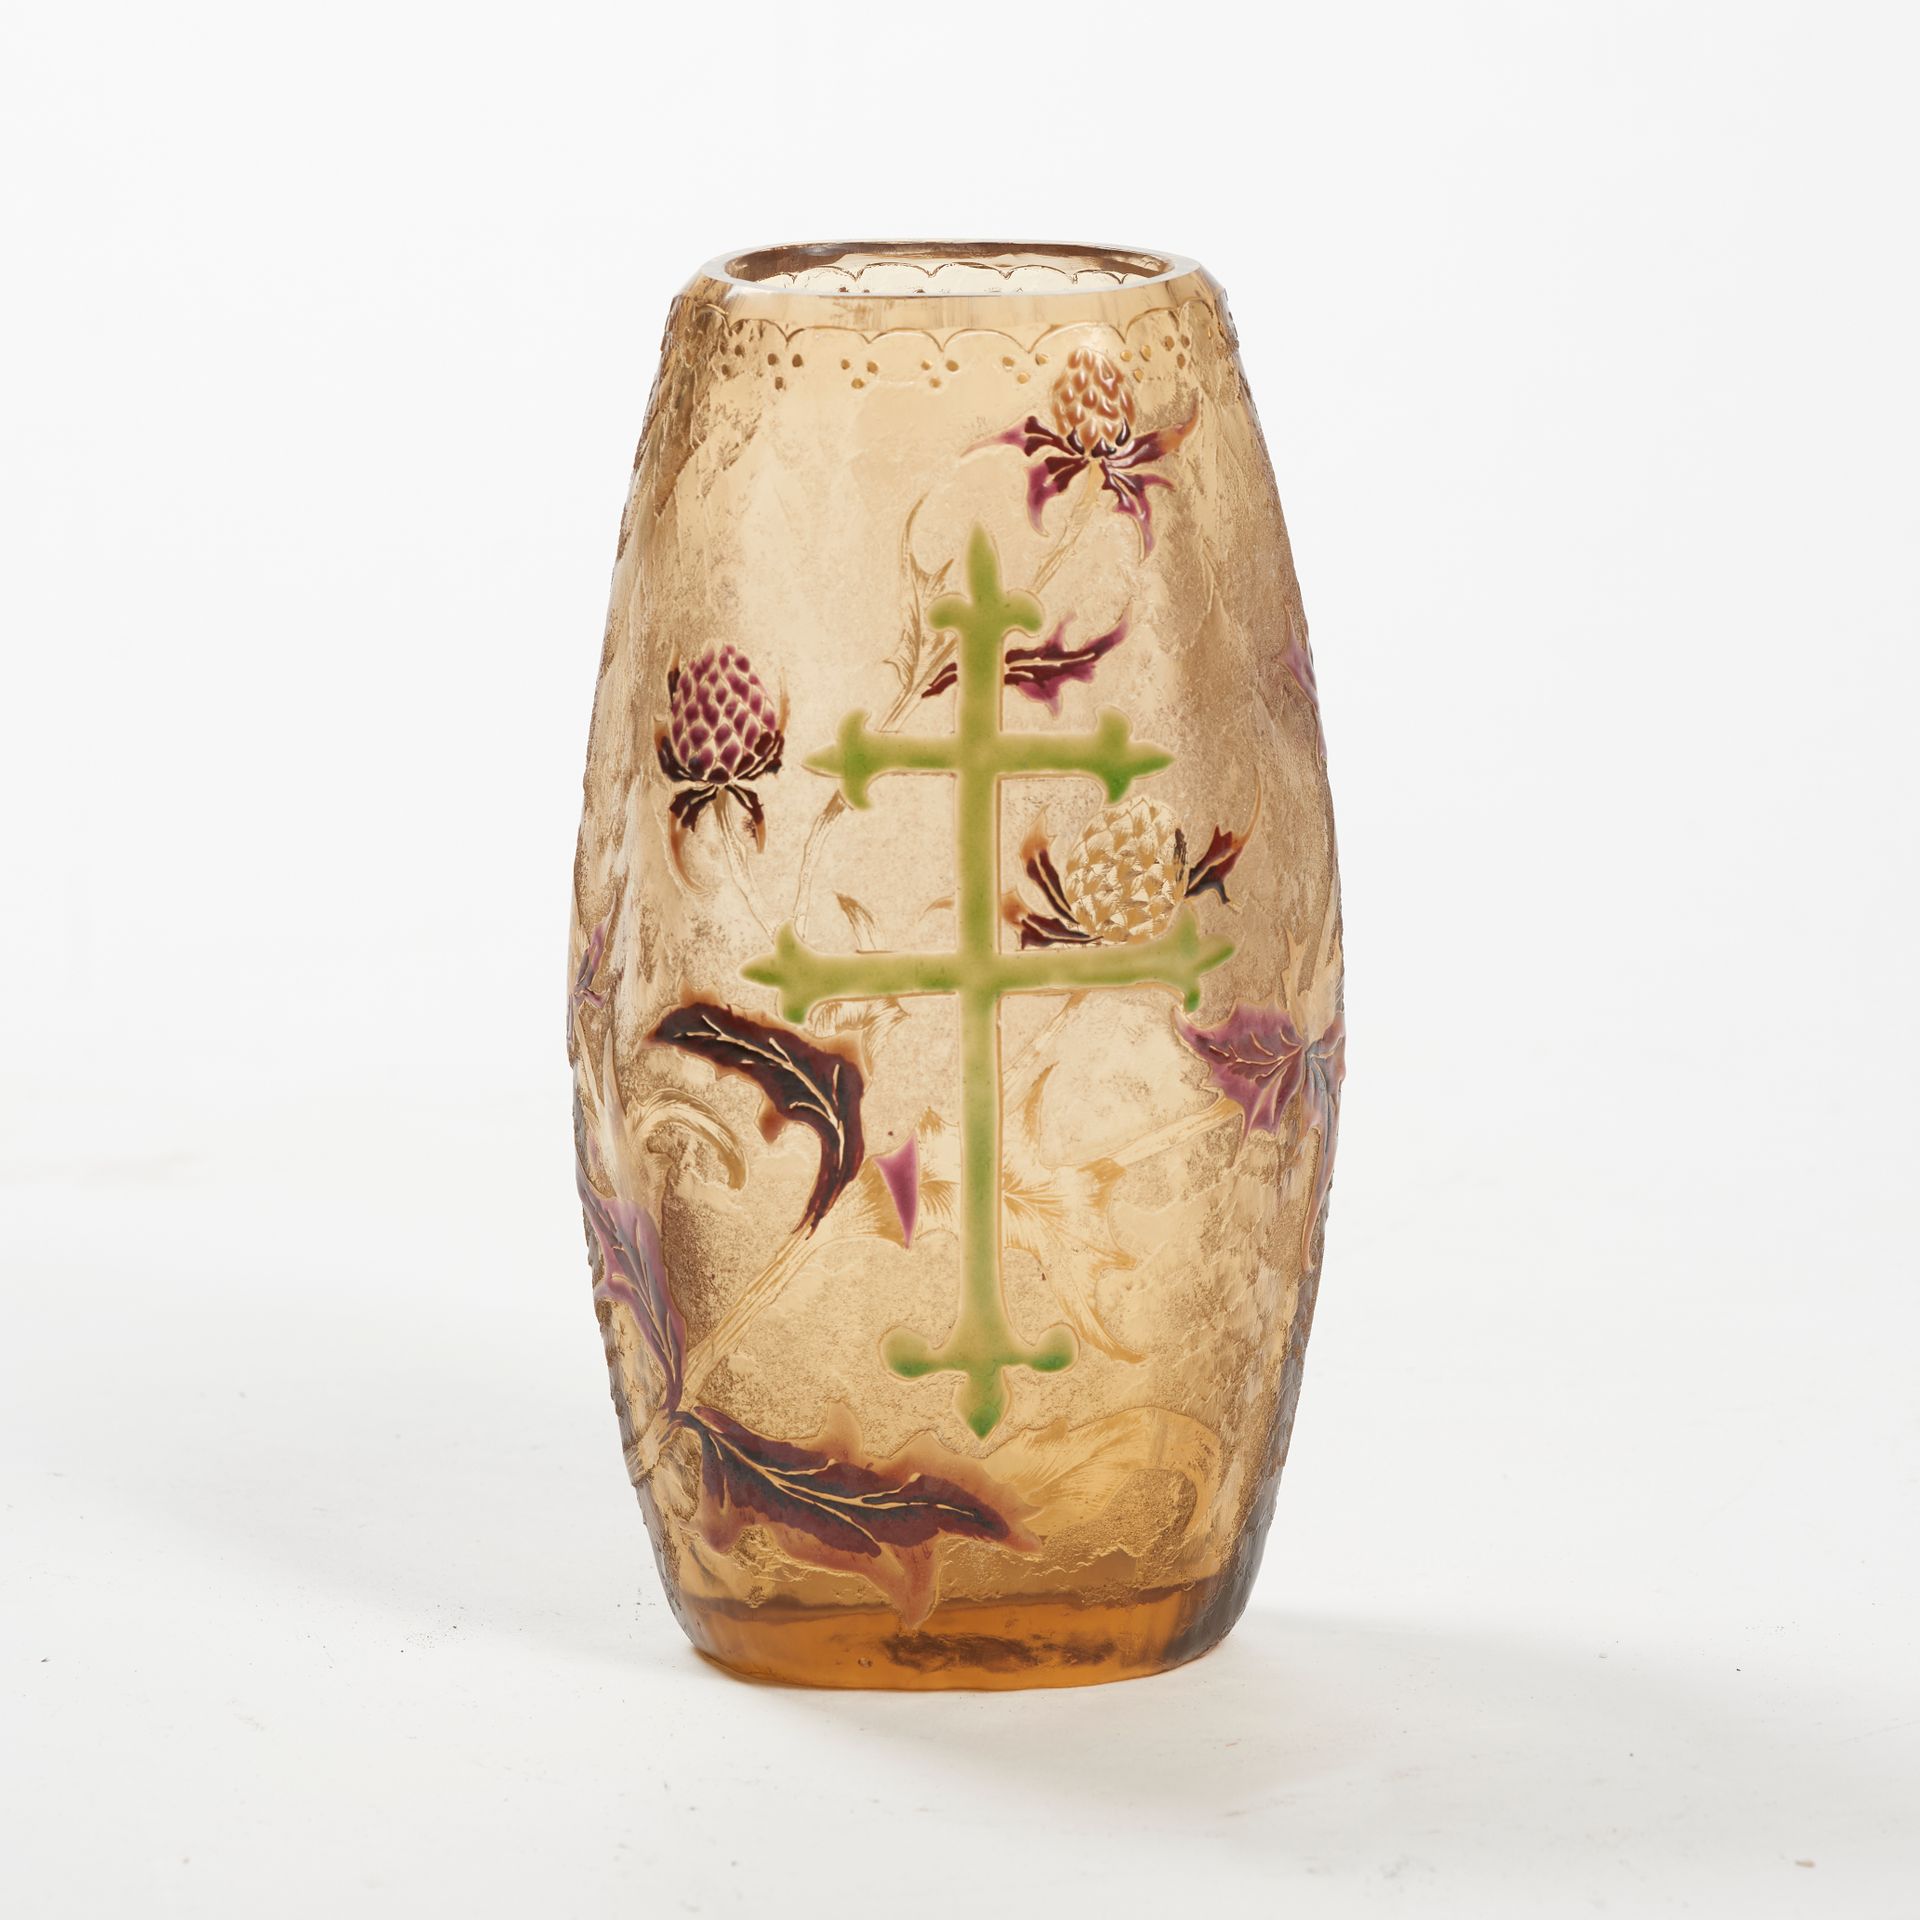 Null Emile GALLE (1846-1904). 

Hexagonal-bodied ovoid vase in amber glass with &hellip;